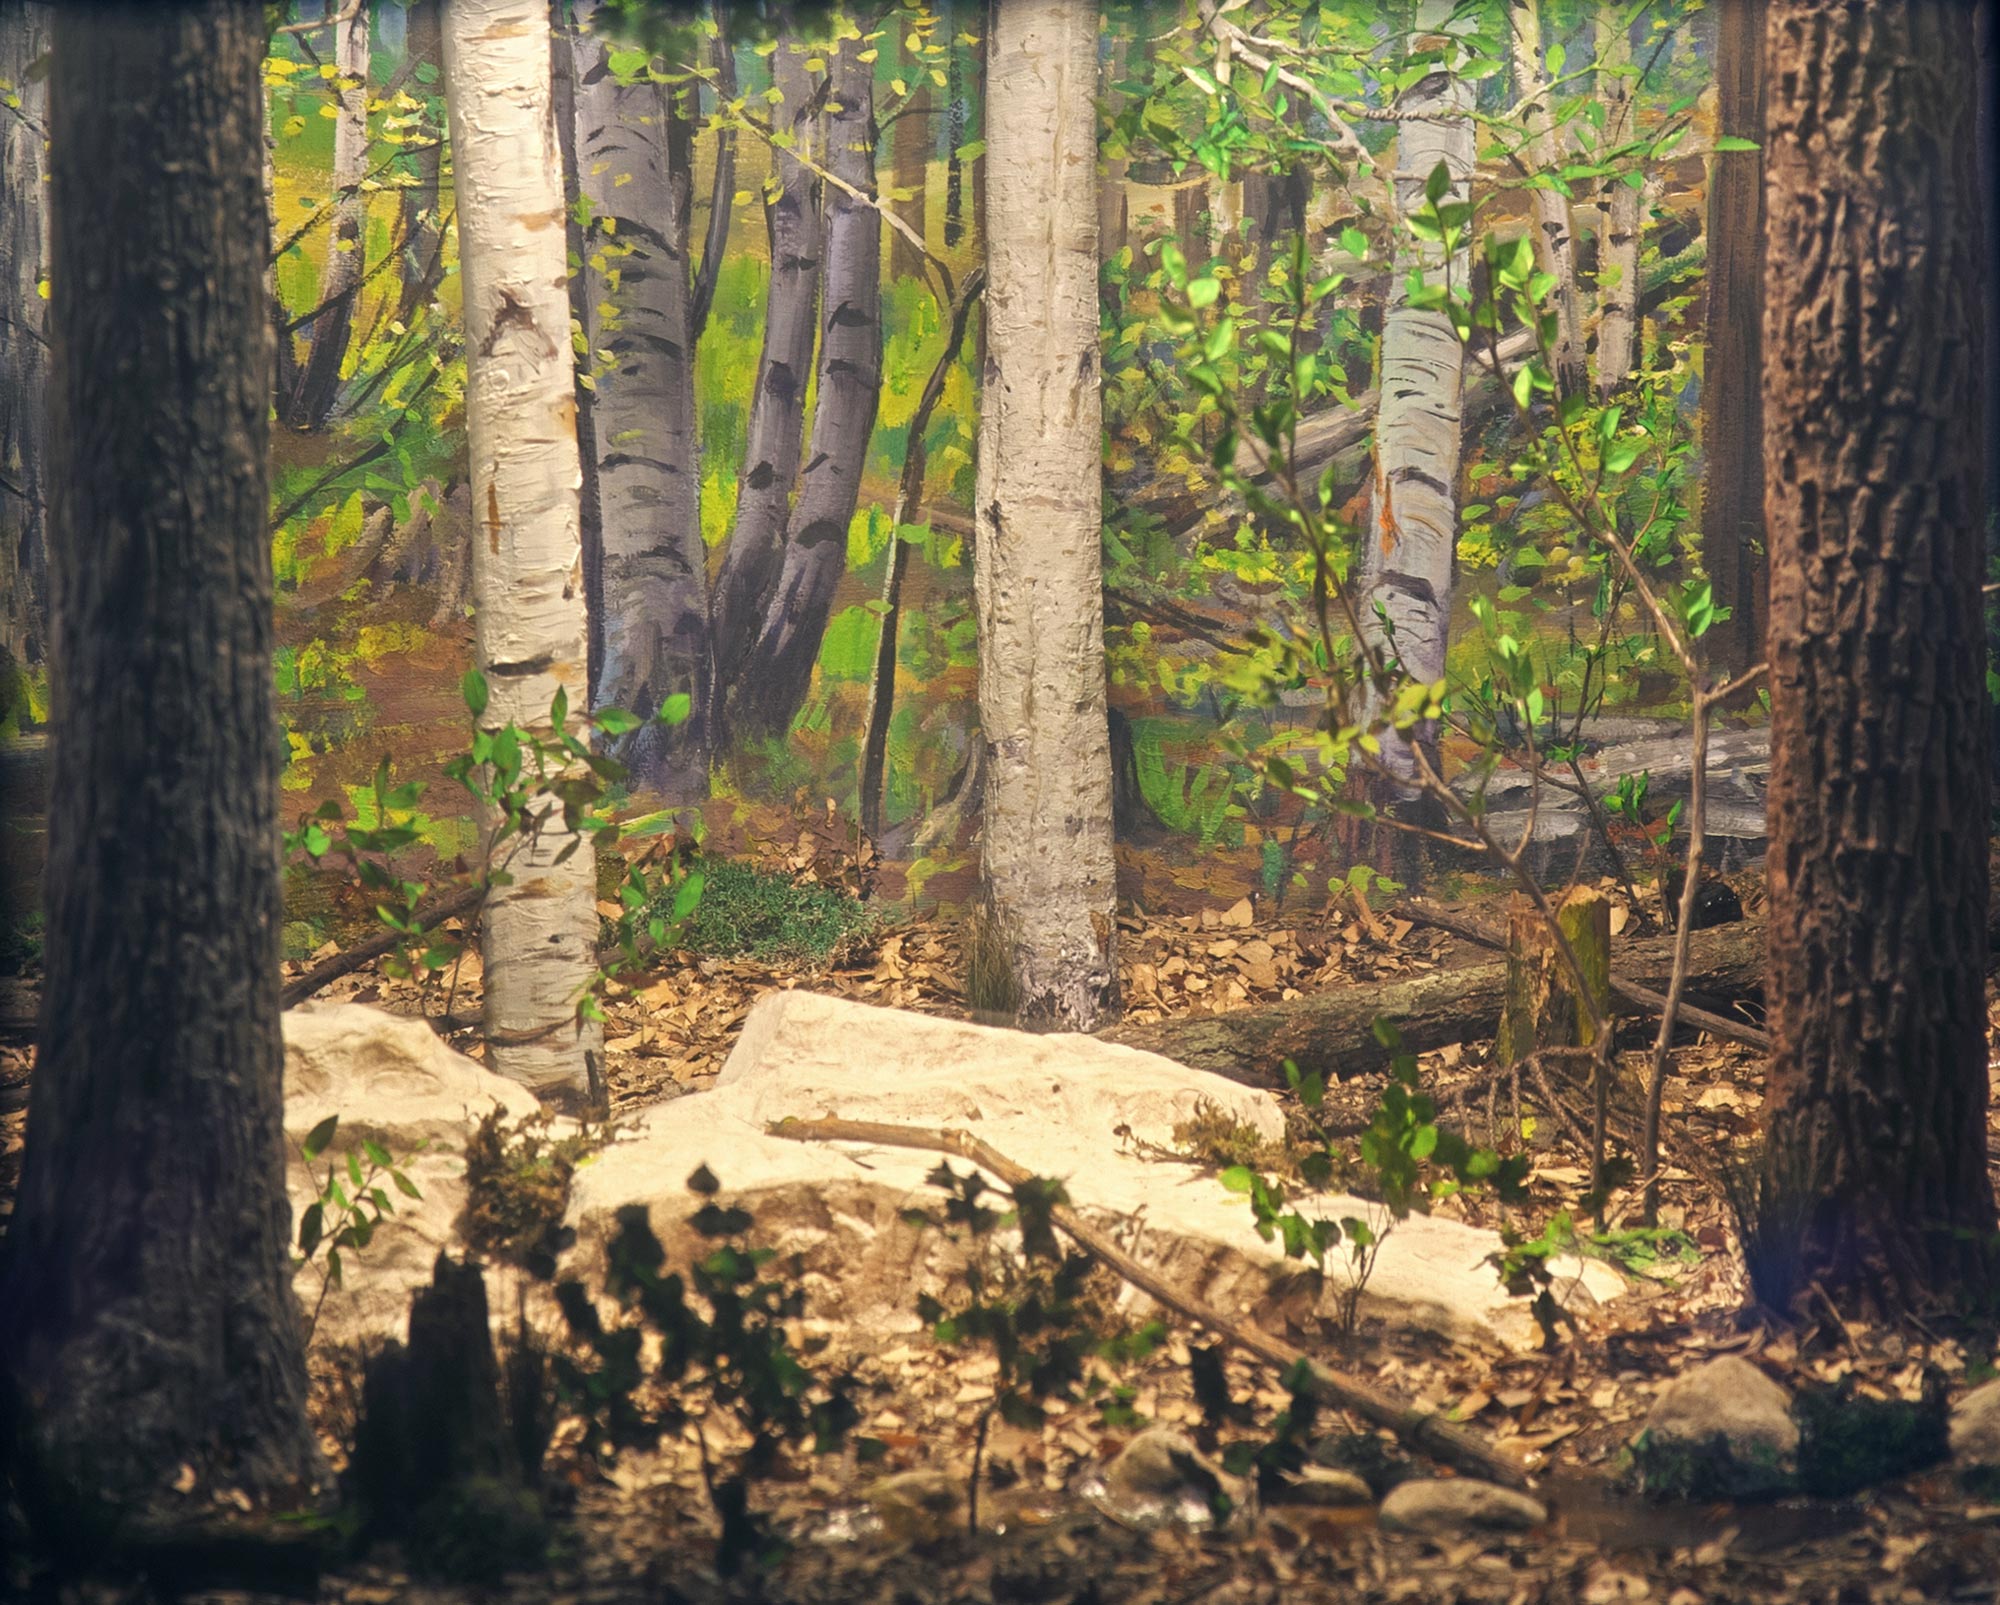 Diorama showing the flora of the woods in the Spring.